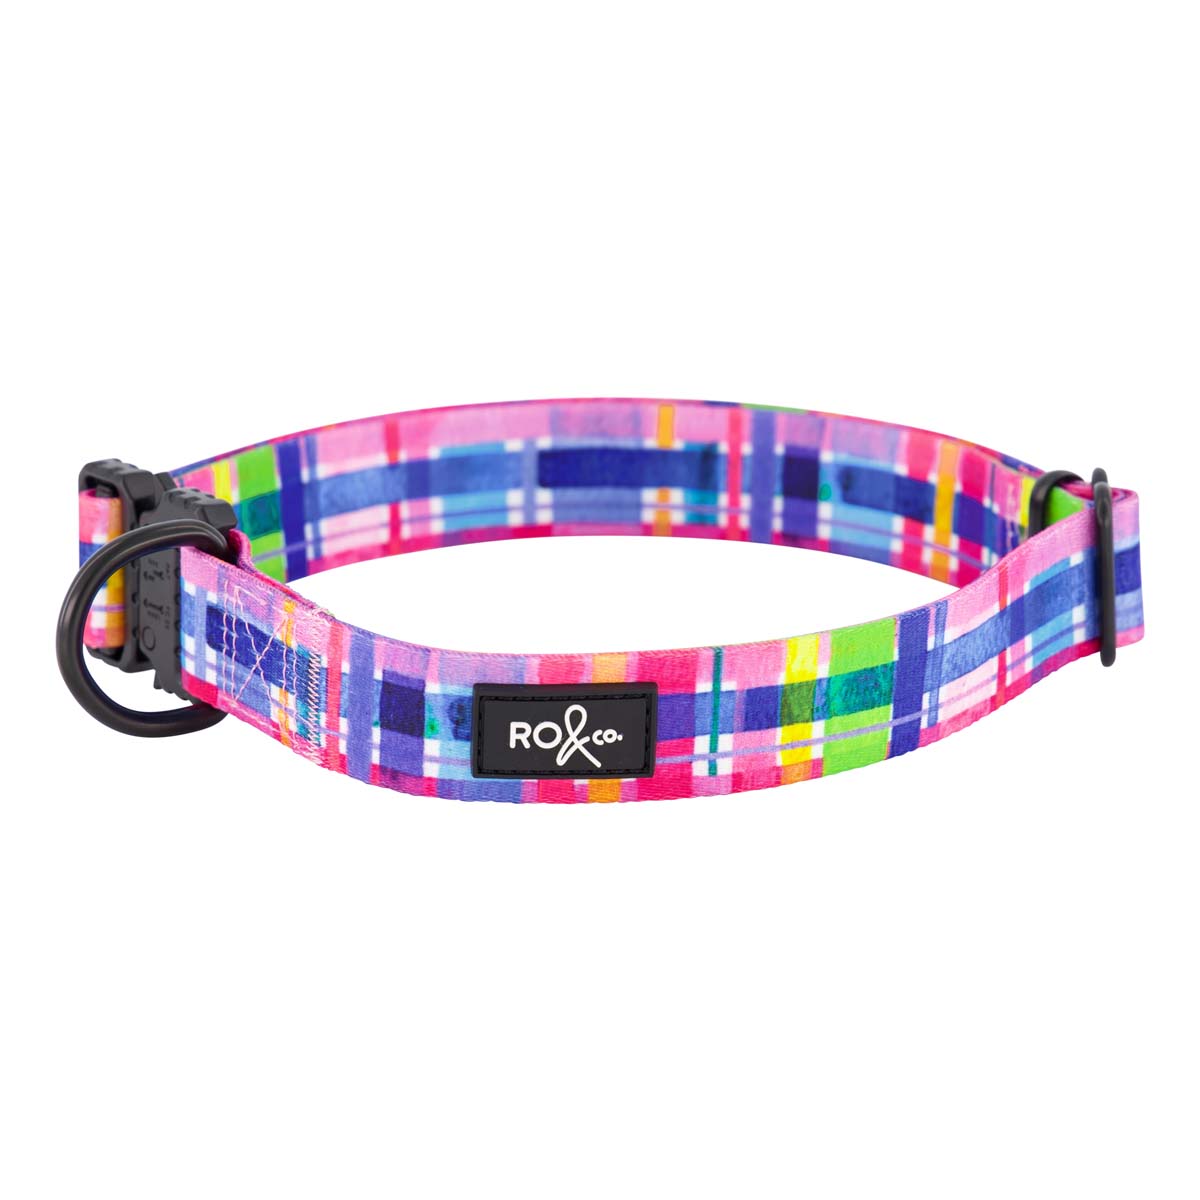 RO x Lordy Dordie Rainbow Gingham Dog Collar (Large Only)